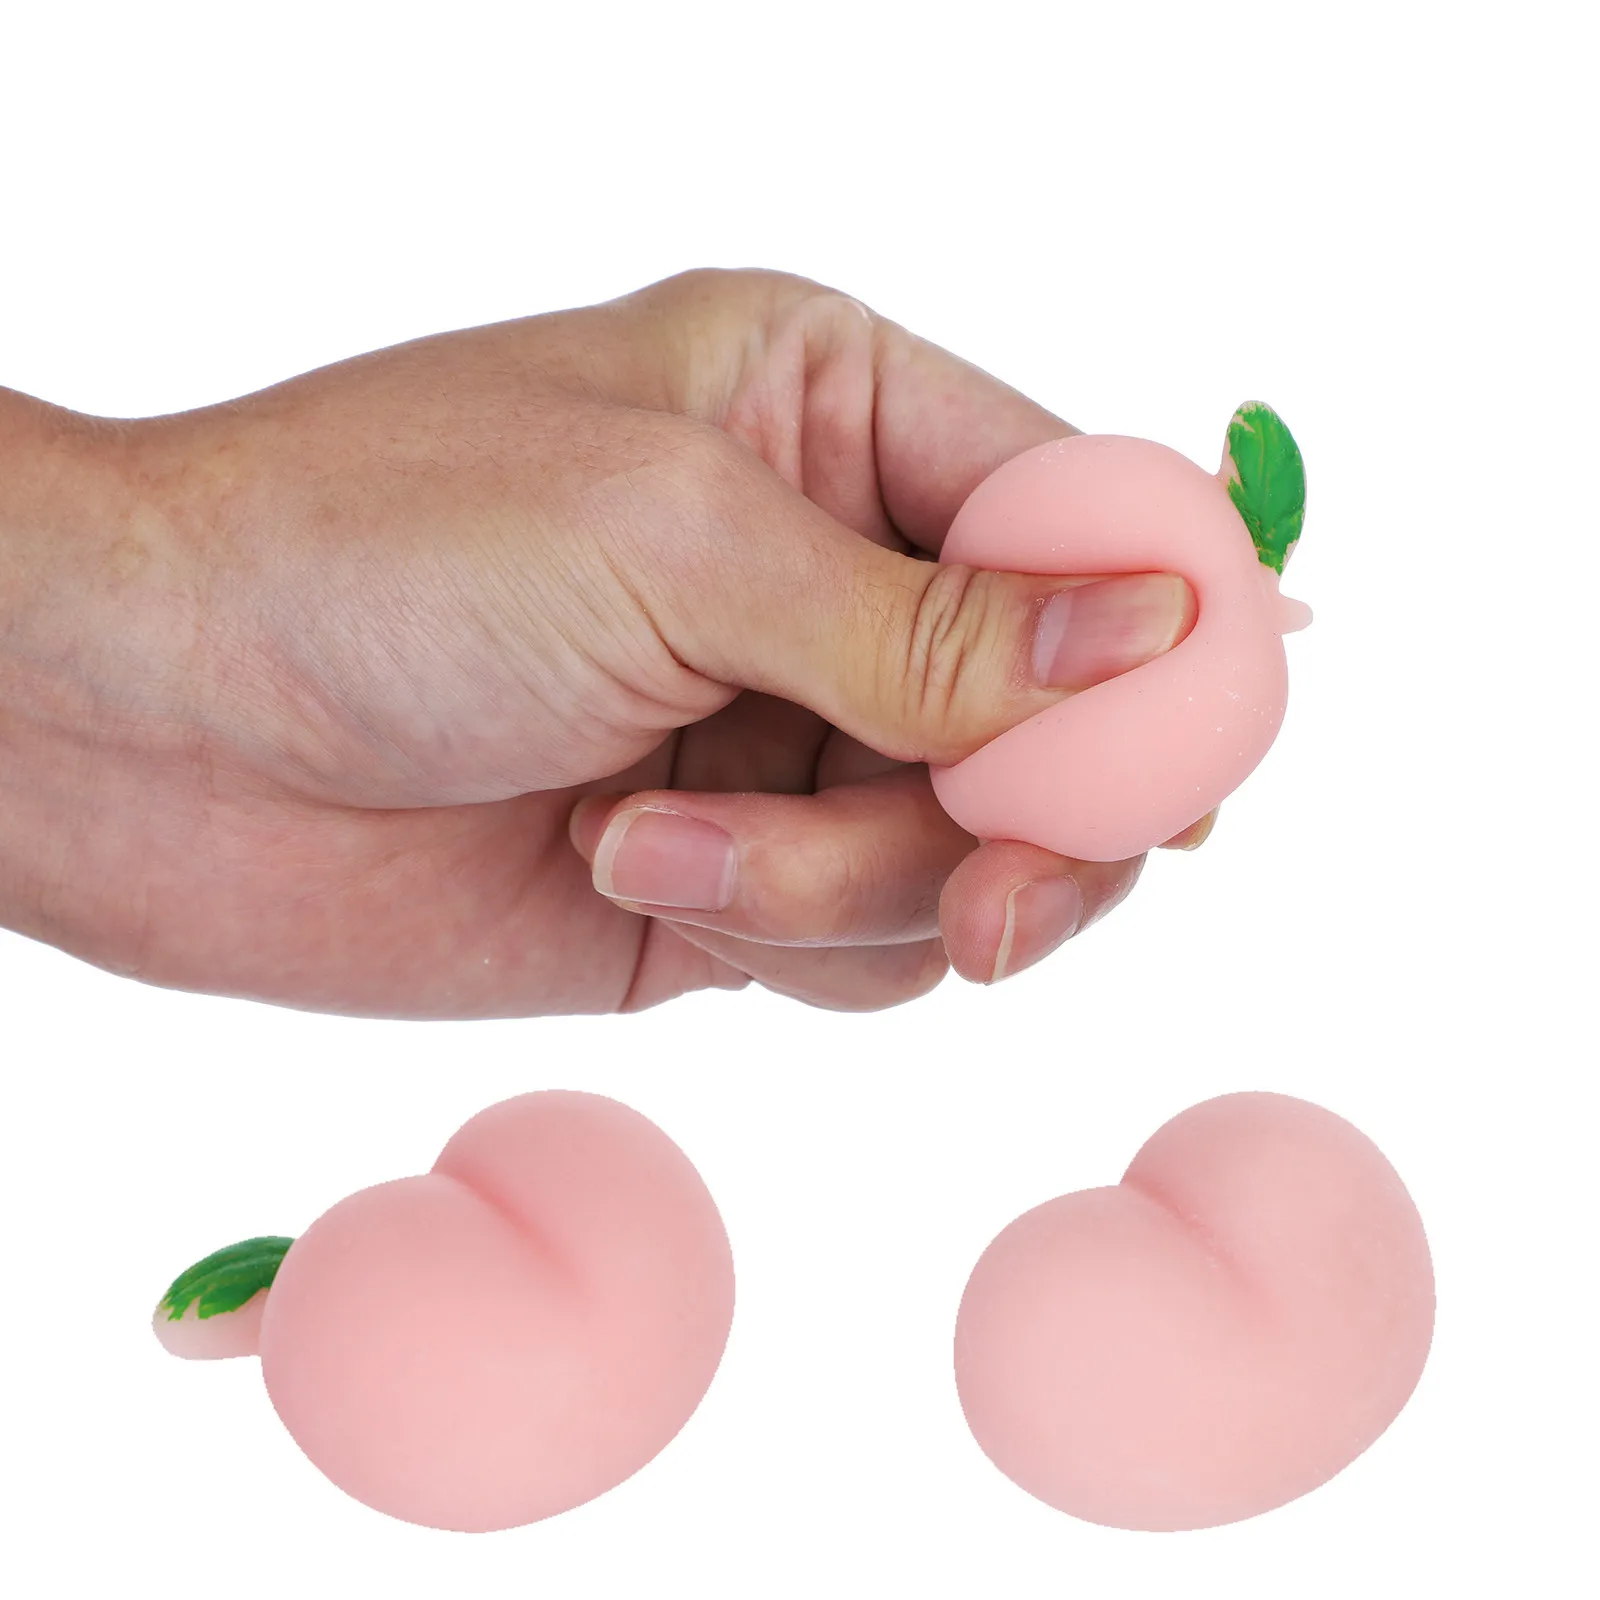 

Mini Peach Squeeze Funny Toy Soft Stress And Anxiety Relief Toys Diy Decor Antistress Squishy Funny Gadgets Decompression Toy